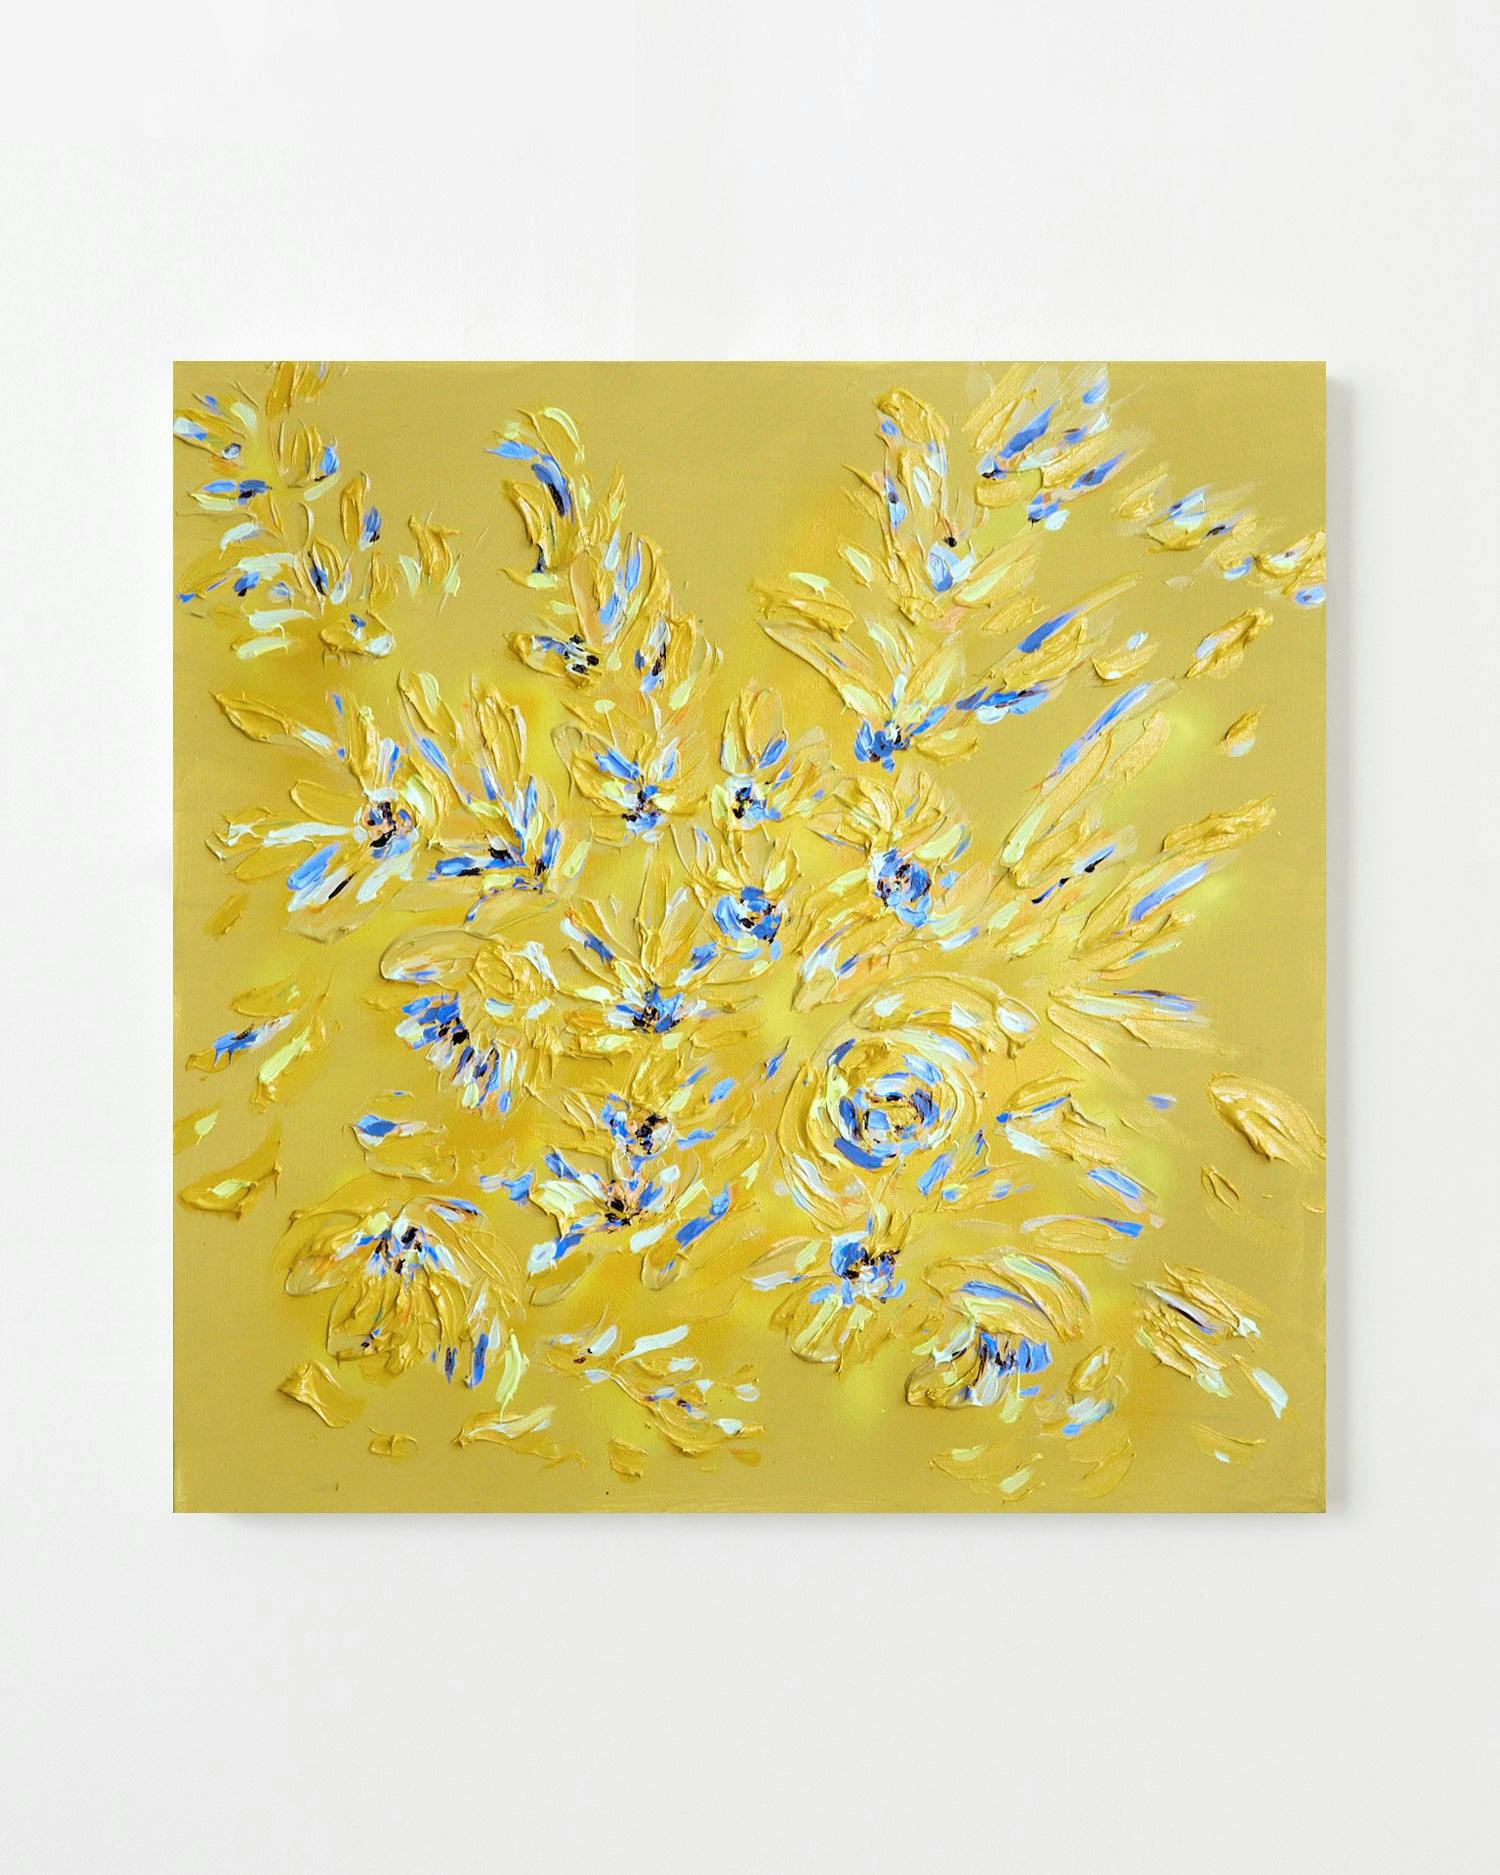 Painting by Erin Lynn Welsh titled "Botany Mono 87".